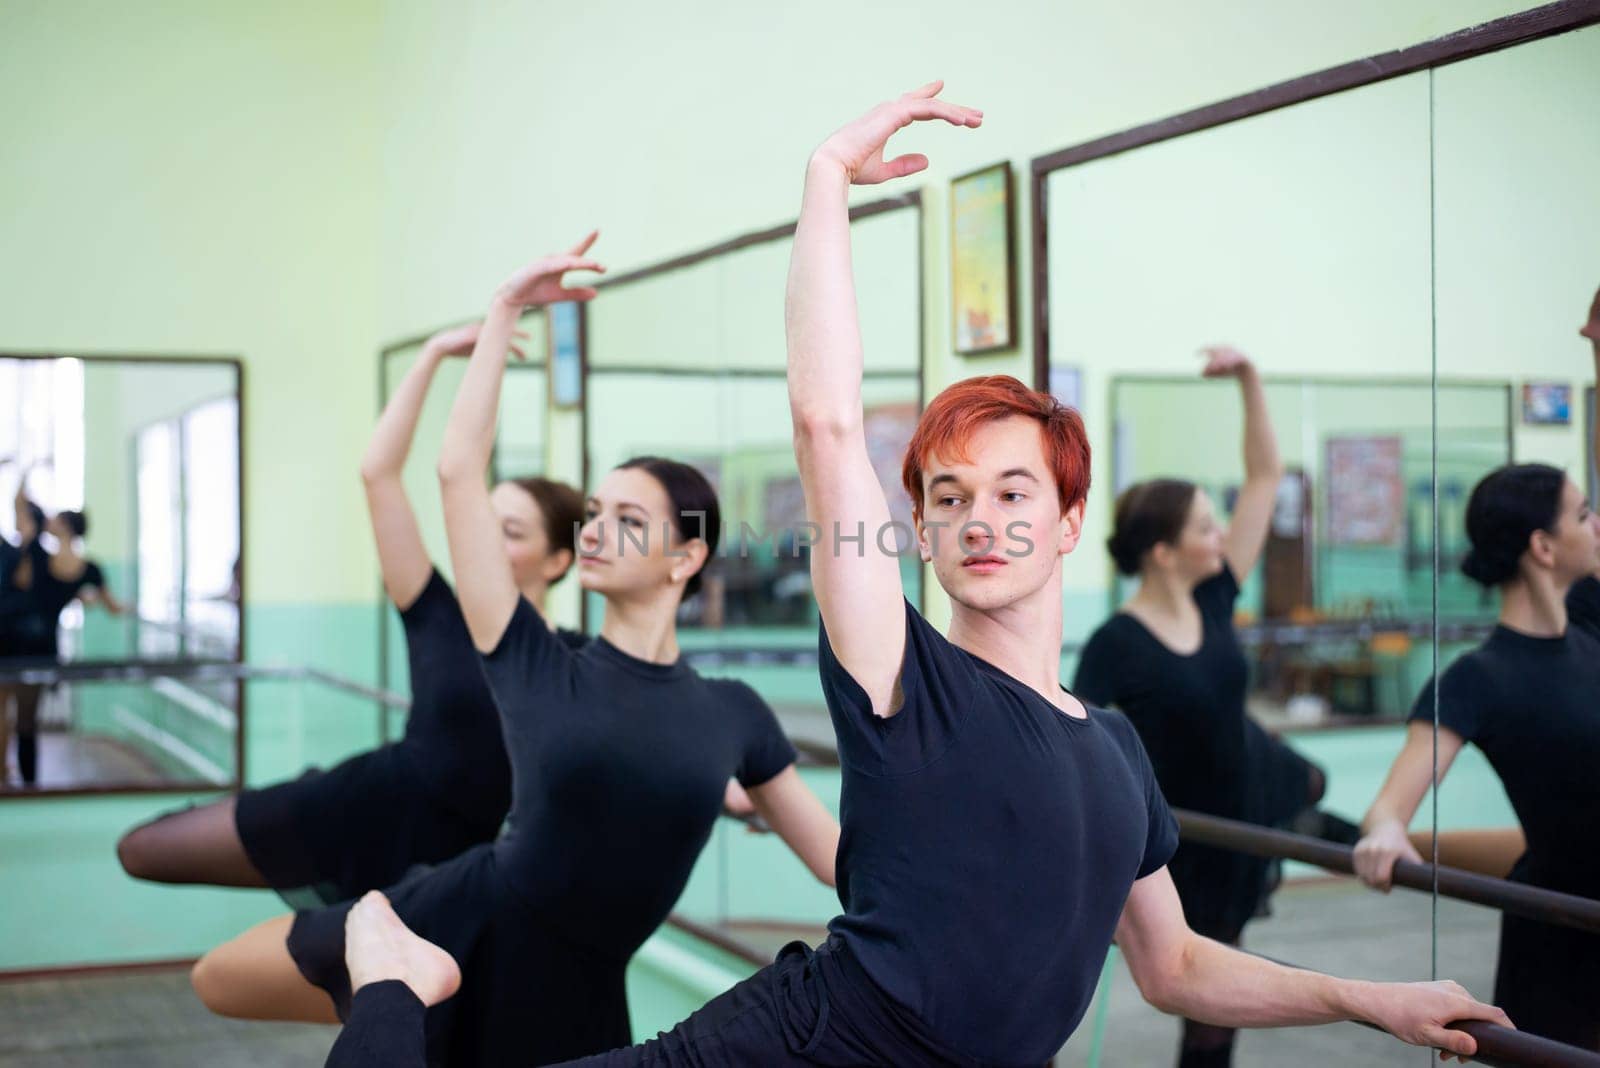 Professional dancers preparing for a next performance on stage, training together in conventional dancing hall